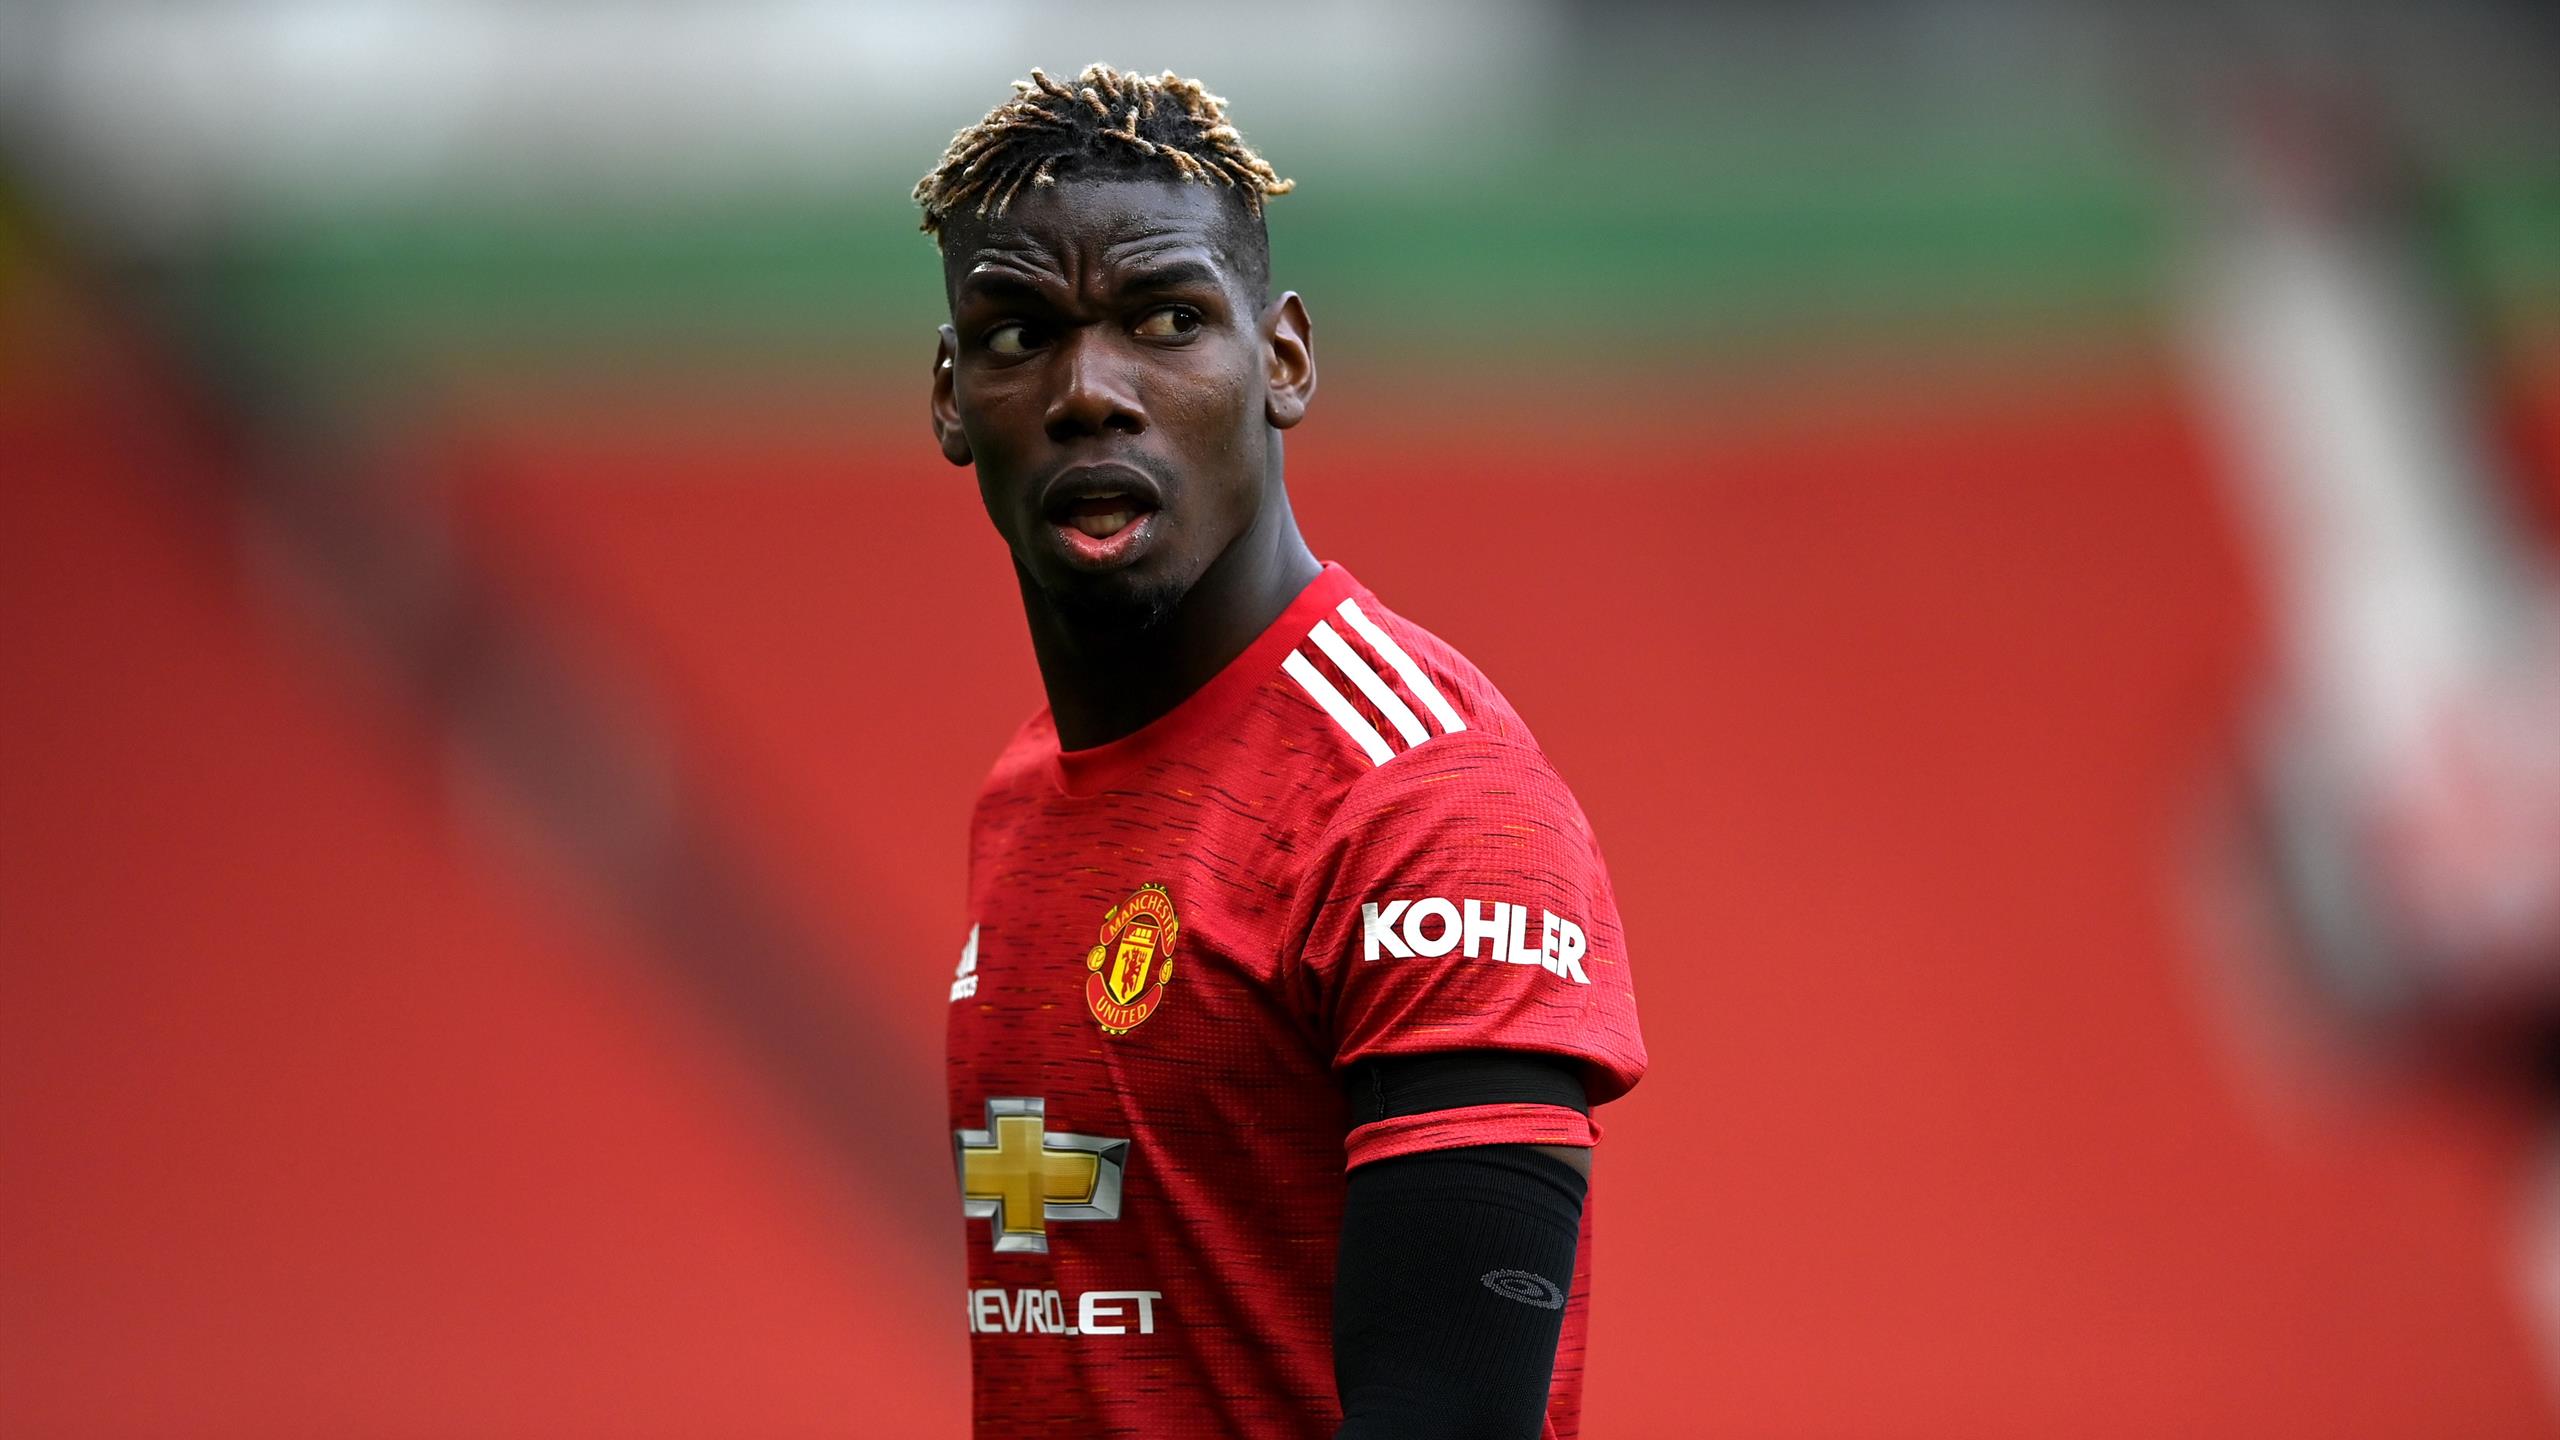 Transfer News United To Make Paul Pogba The Premier League's Highest Paid Player